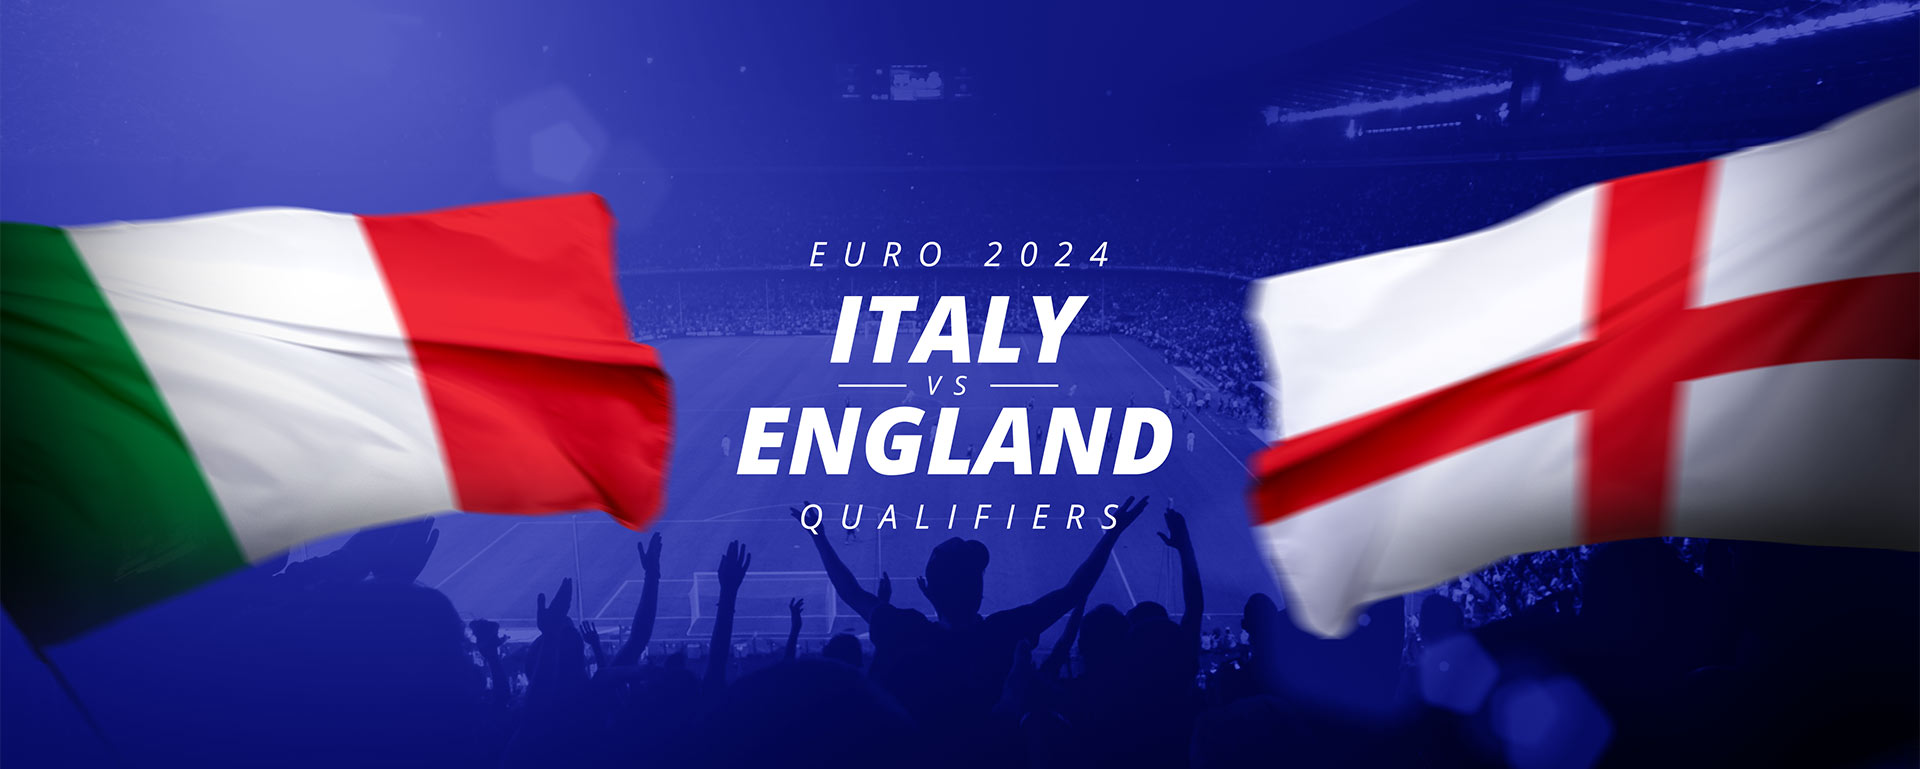 EURO 2024 QUALIFIERS: ITALY V ENGLAND